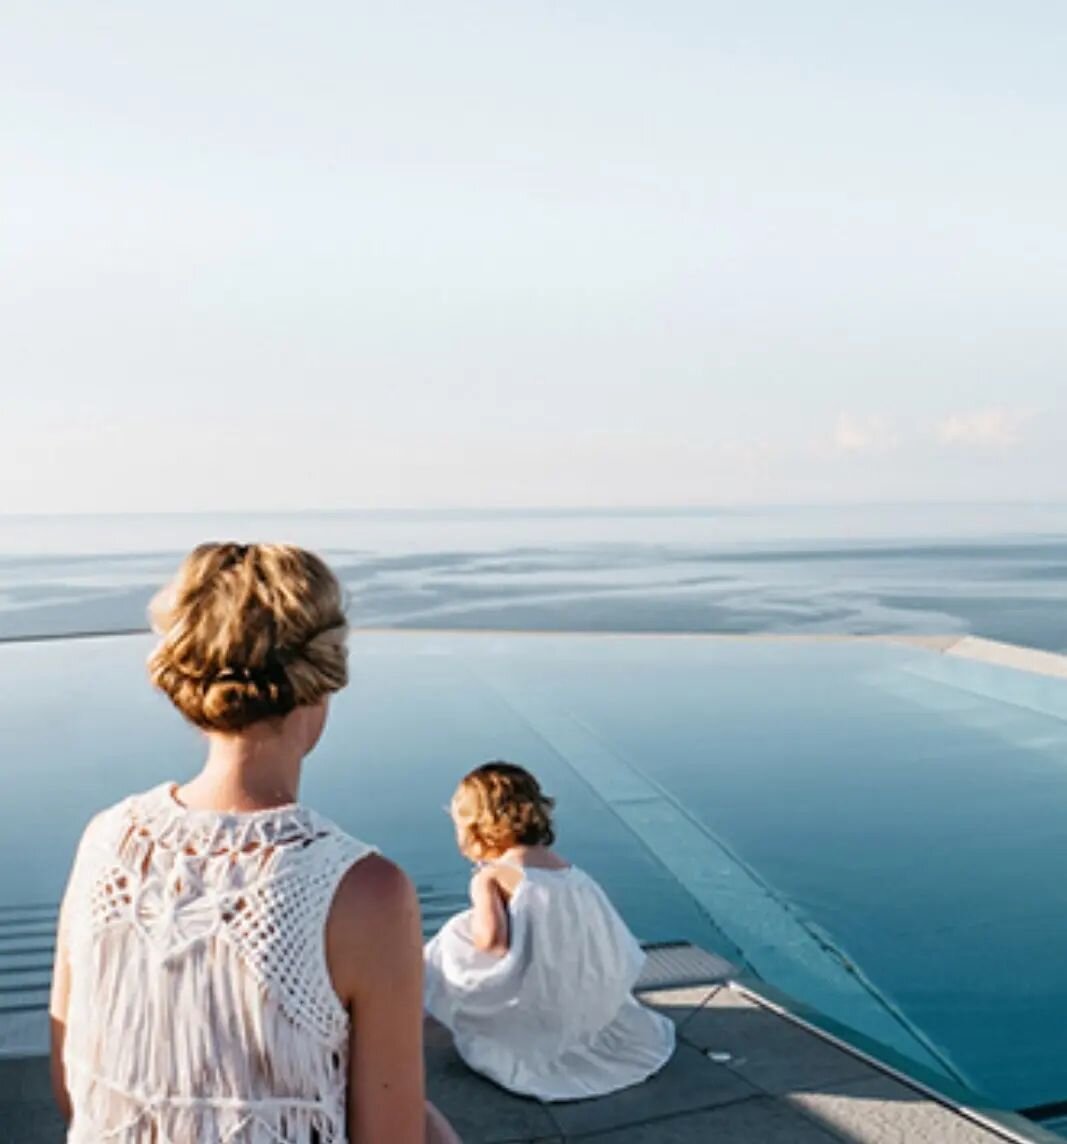 The inifinty &quot;Piscina della Torre' with unparalleled views over the Tuscan Archipelago